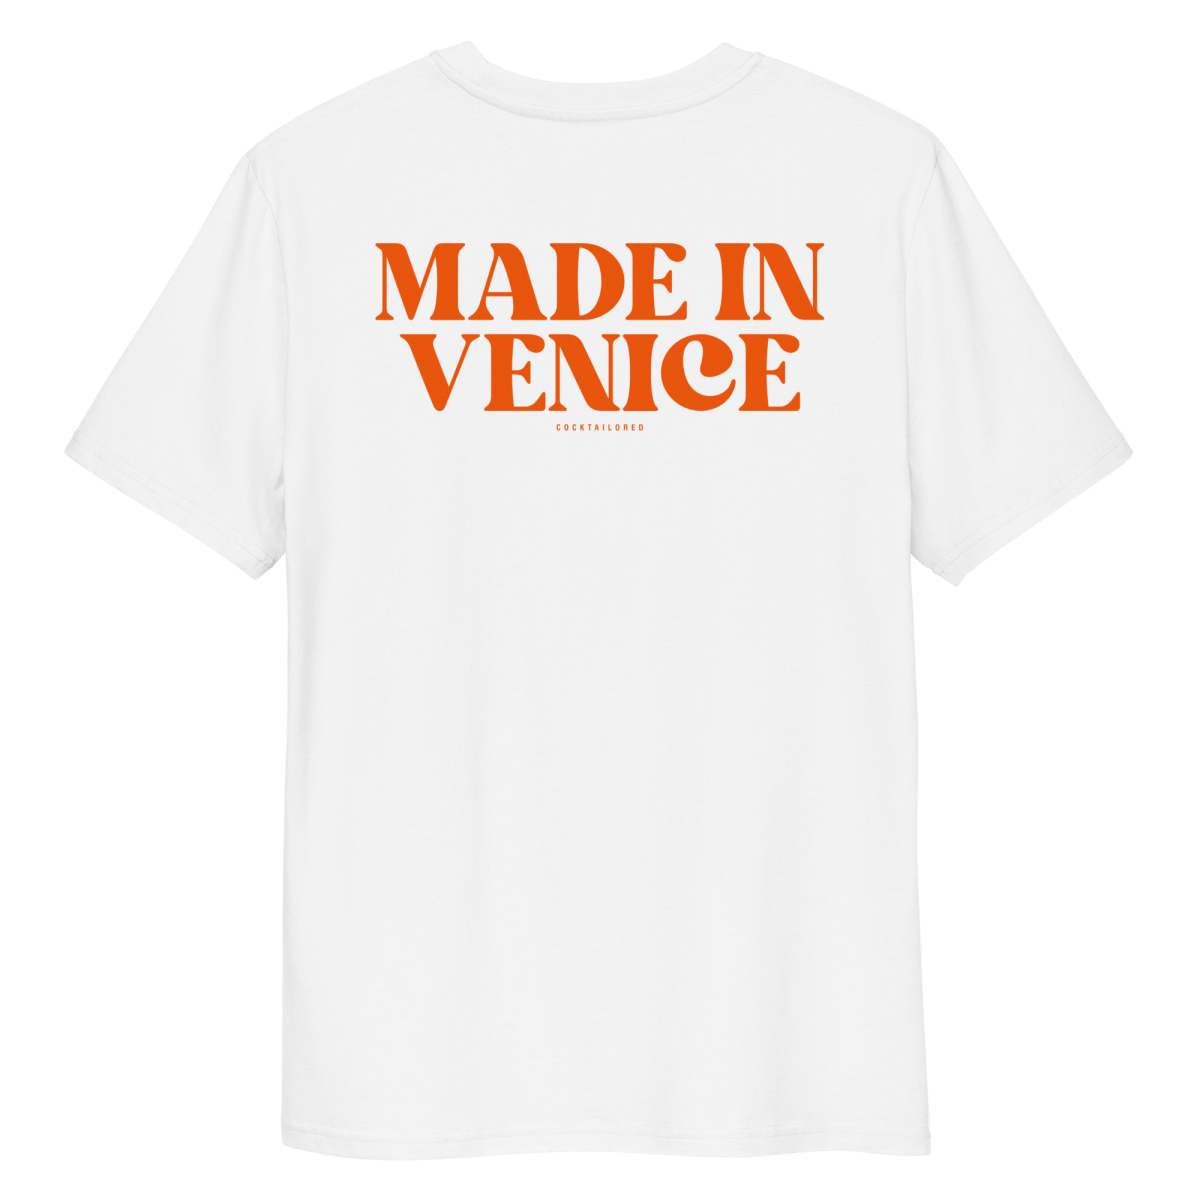 The Spritz "Made In" organic t-shirt